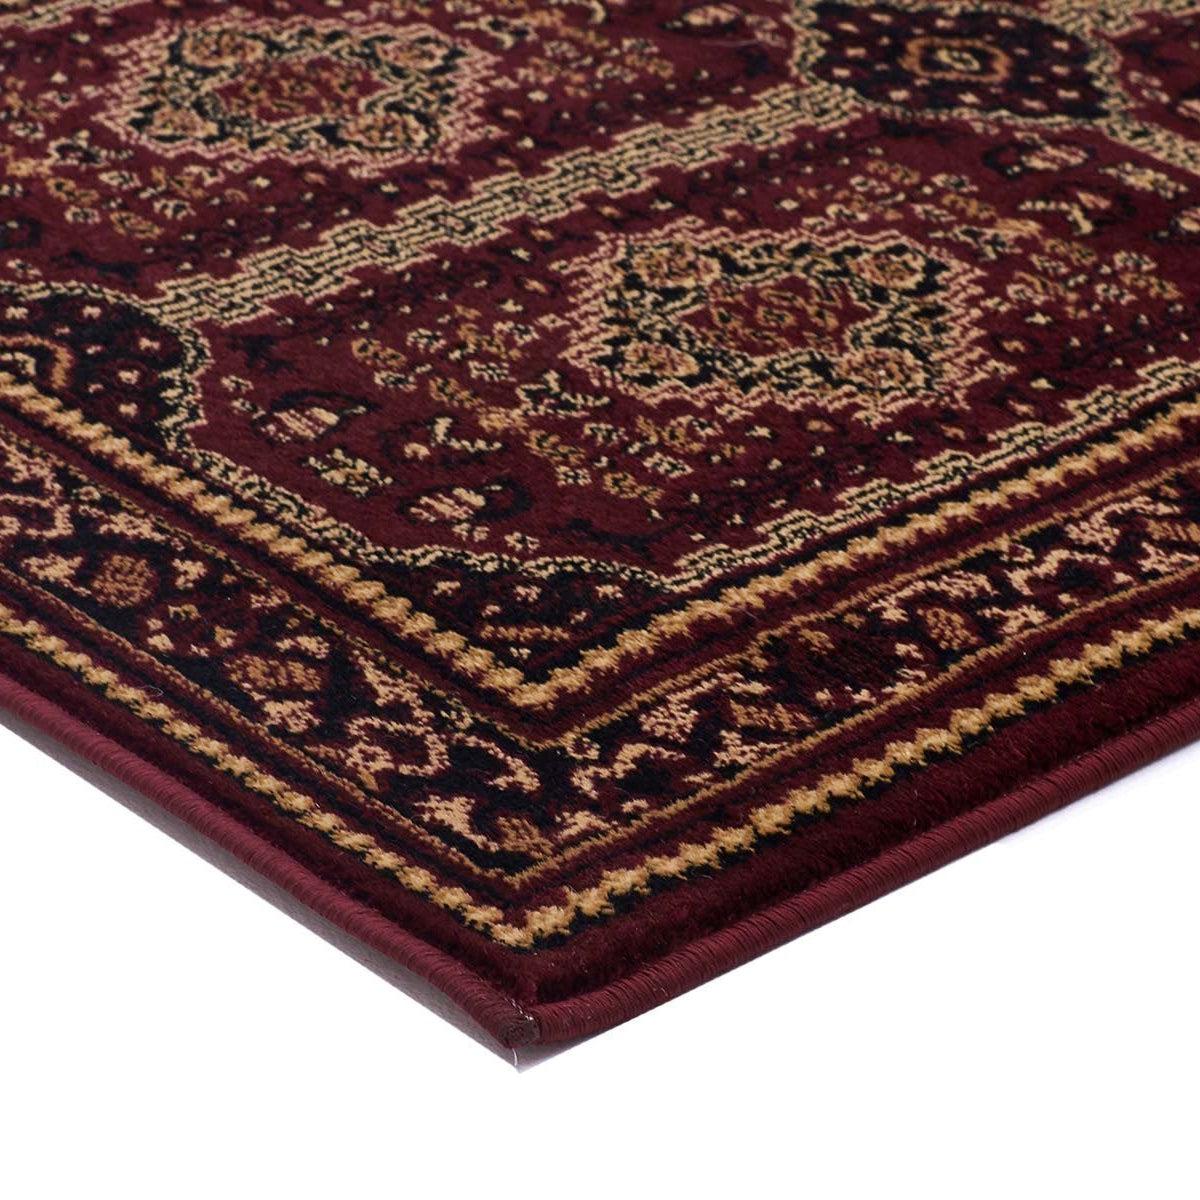 Istanbul Collection Traditional Afghan Design Burgundy Red Rug